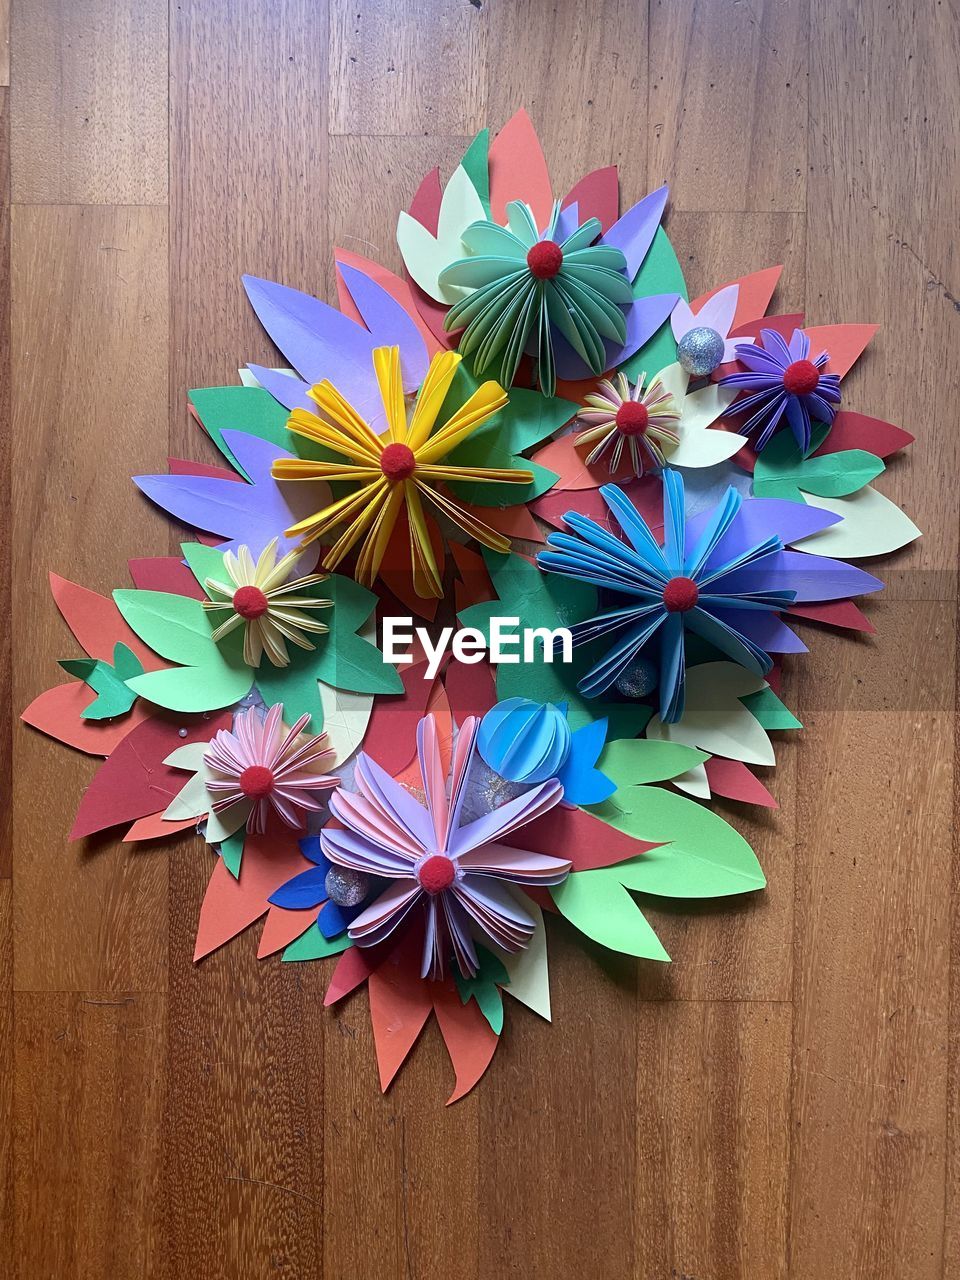 wheel, multi colored, origami, wood, art, creativity, high angle view, paper, no people, art paper, origami paper, craft, indoors, table, directly above, flower, still life, shape, decoration, large group of objects, variation, close-up, petal, blue